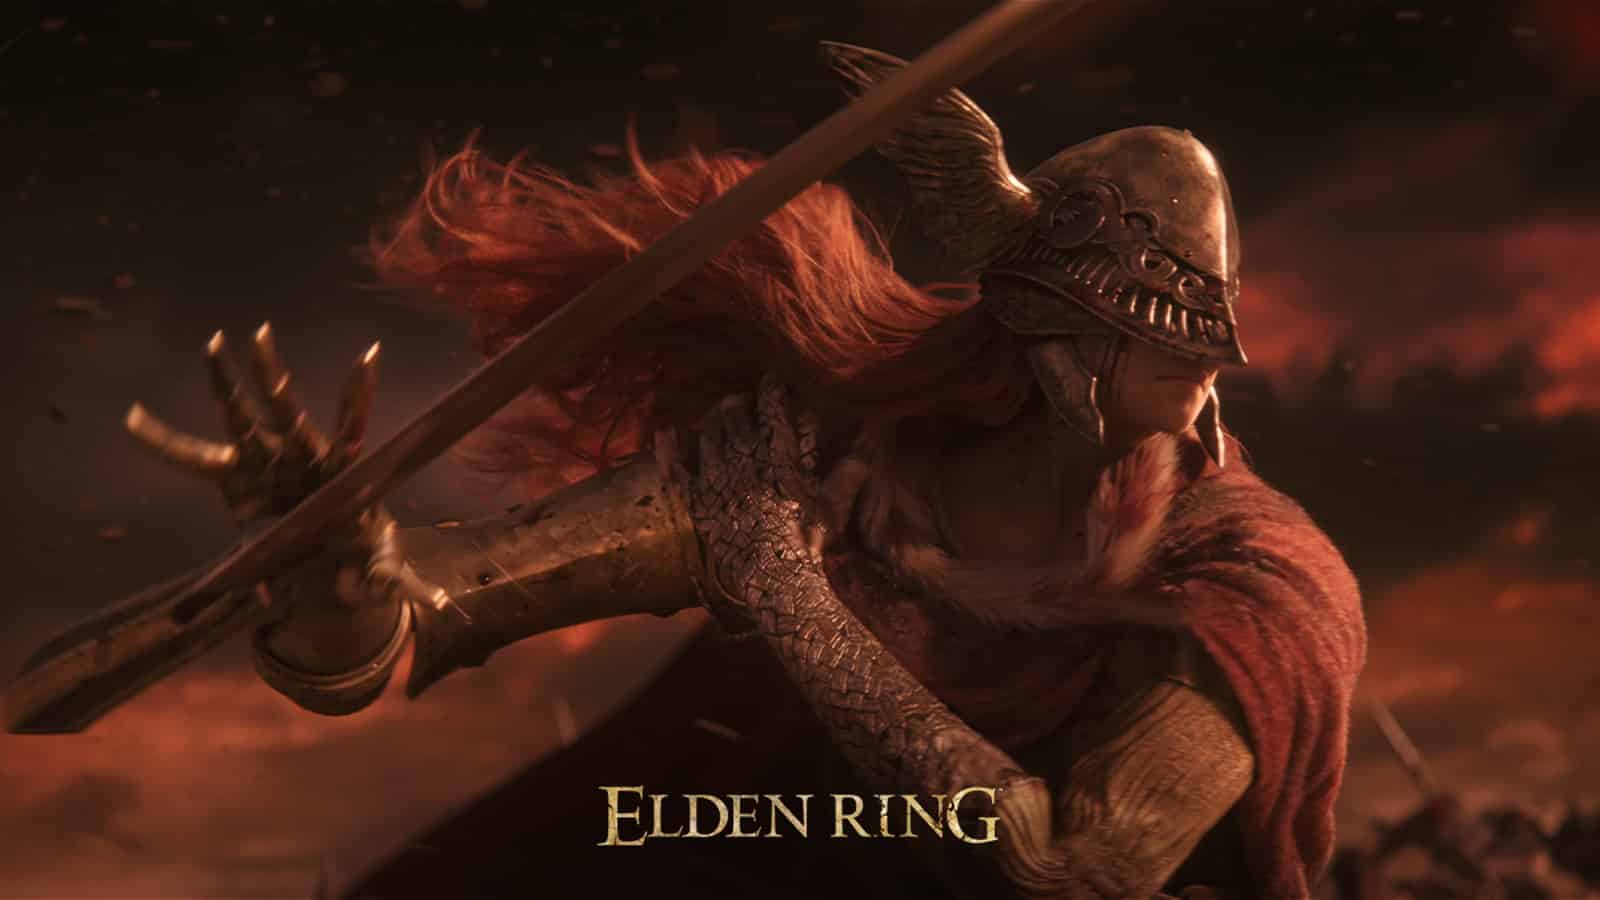 Elden Ring: How to beat Malenia Blade of Miquella and Goddess of Rot